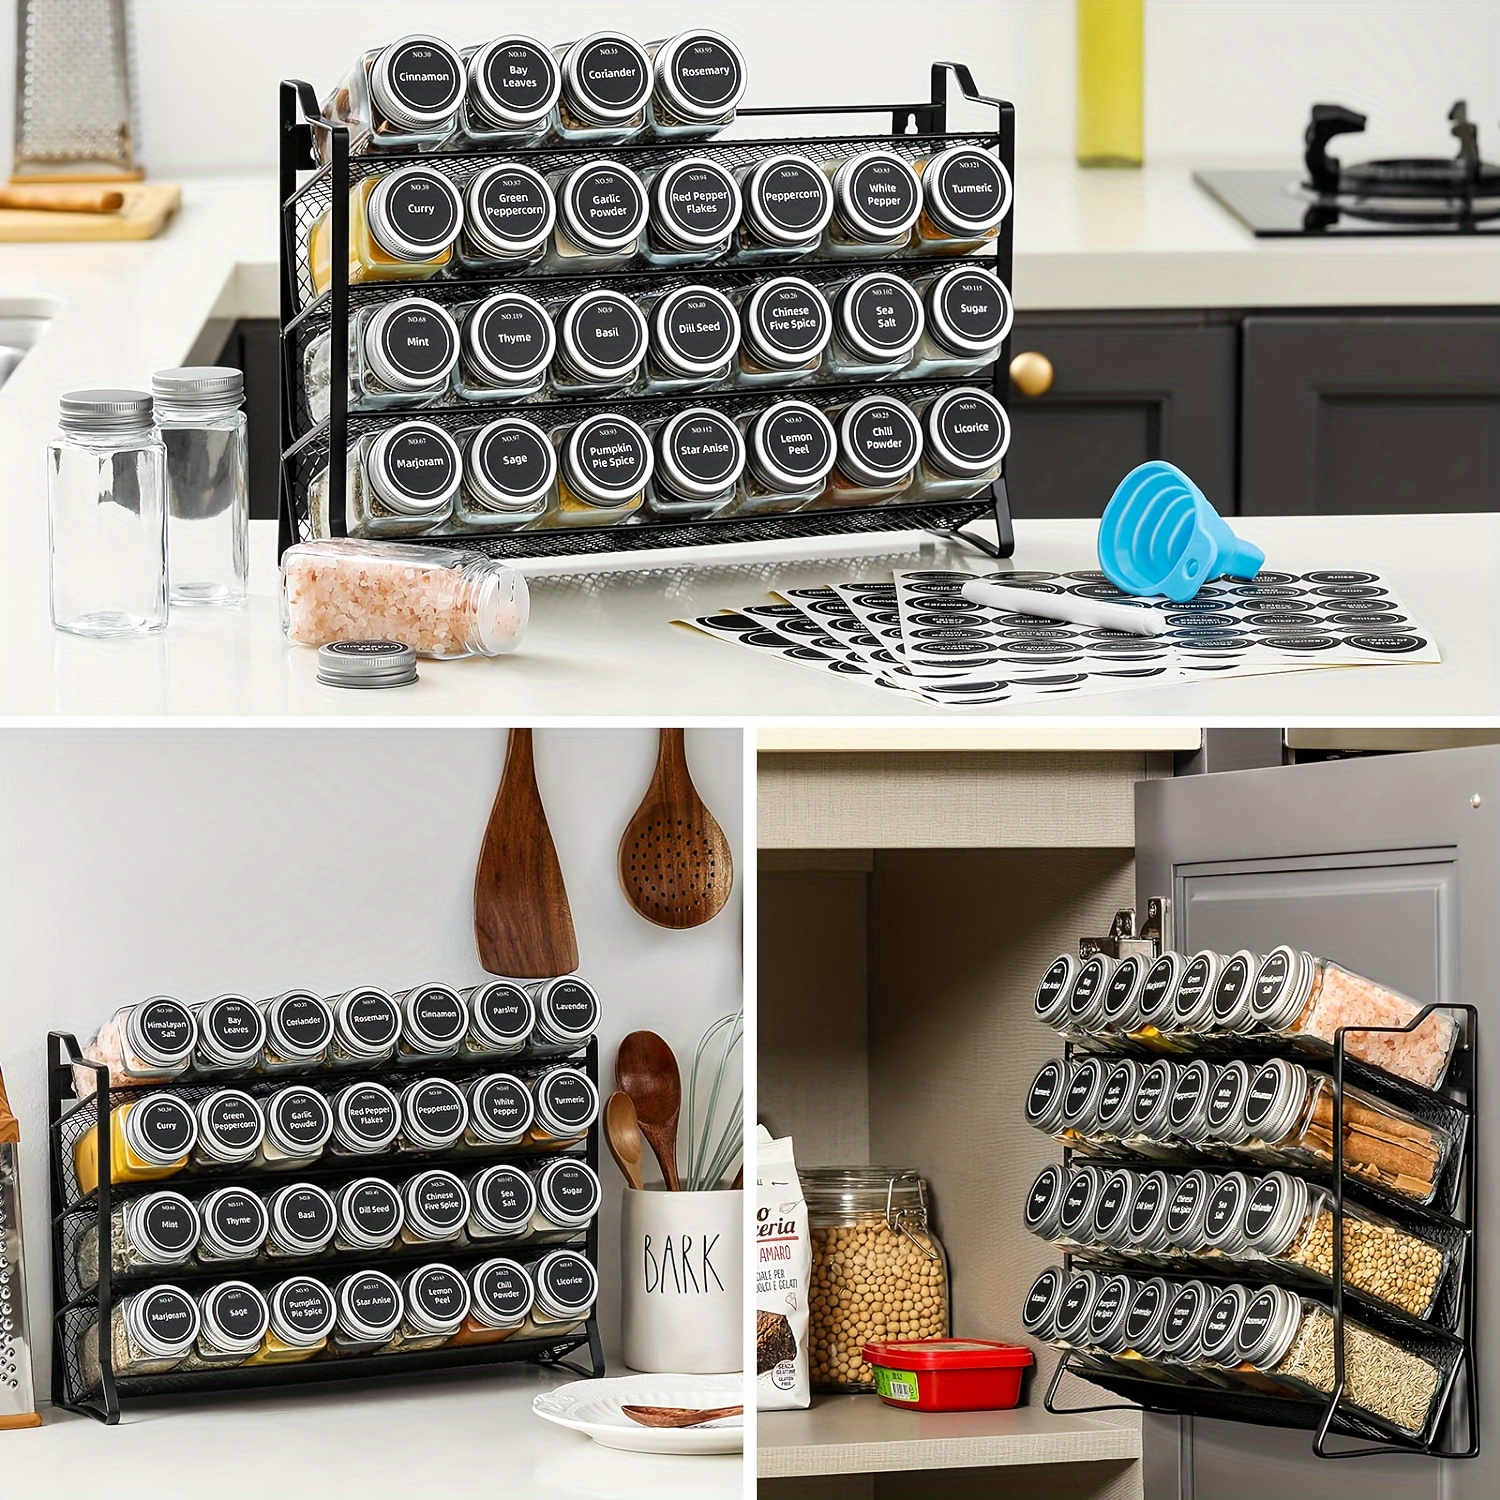 

Spice Rack Display With 28 Spice Bottles, 386 Spice Stickers, Chalk Pen, And Filling Accessories For Cabinet, Kitchen Counter, Pantry, Cupboard, Or Wall & Door Hanging